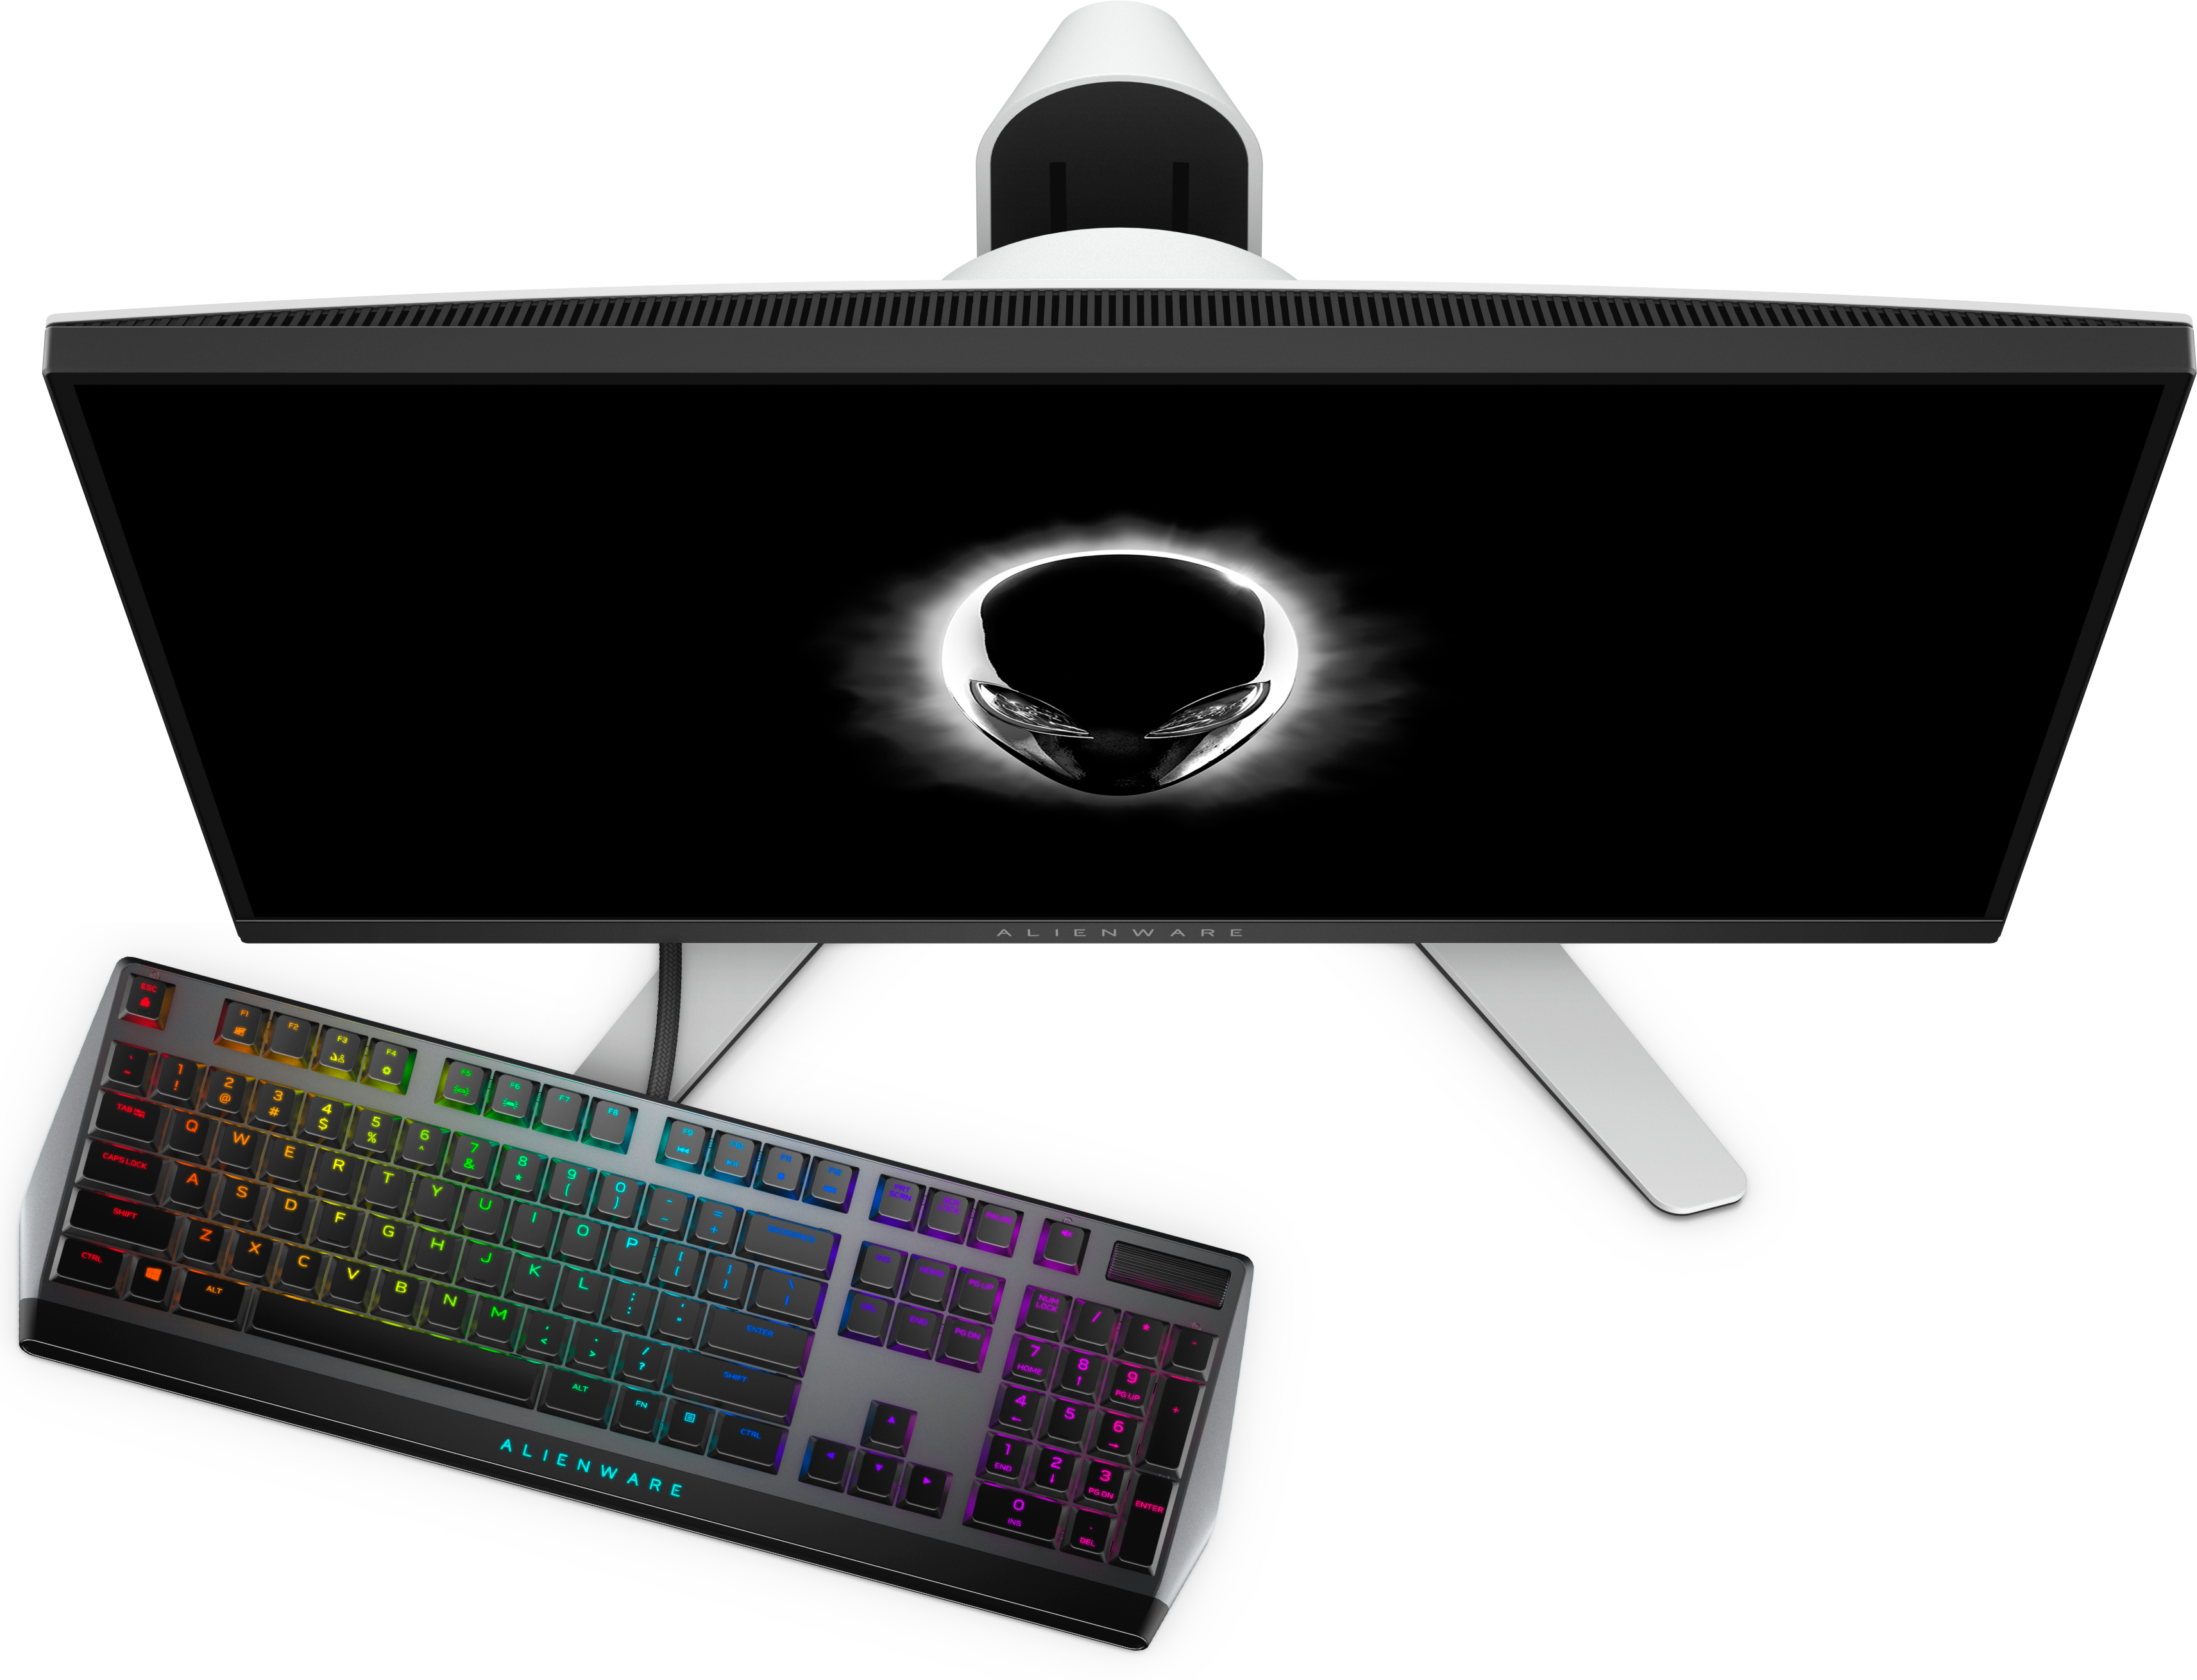 Disillusion Spending pierce Fast & Furious: The Alienware 27 (AW2720HF) 240 Hz IPS Monitor with FreeSync